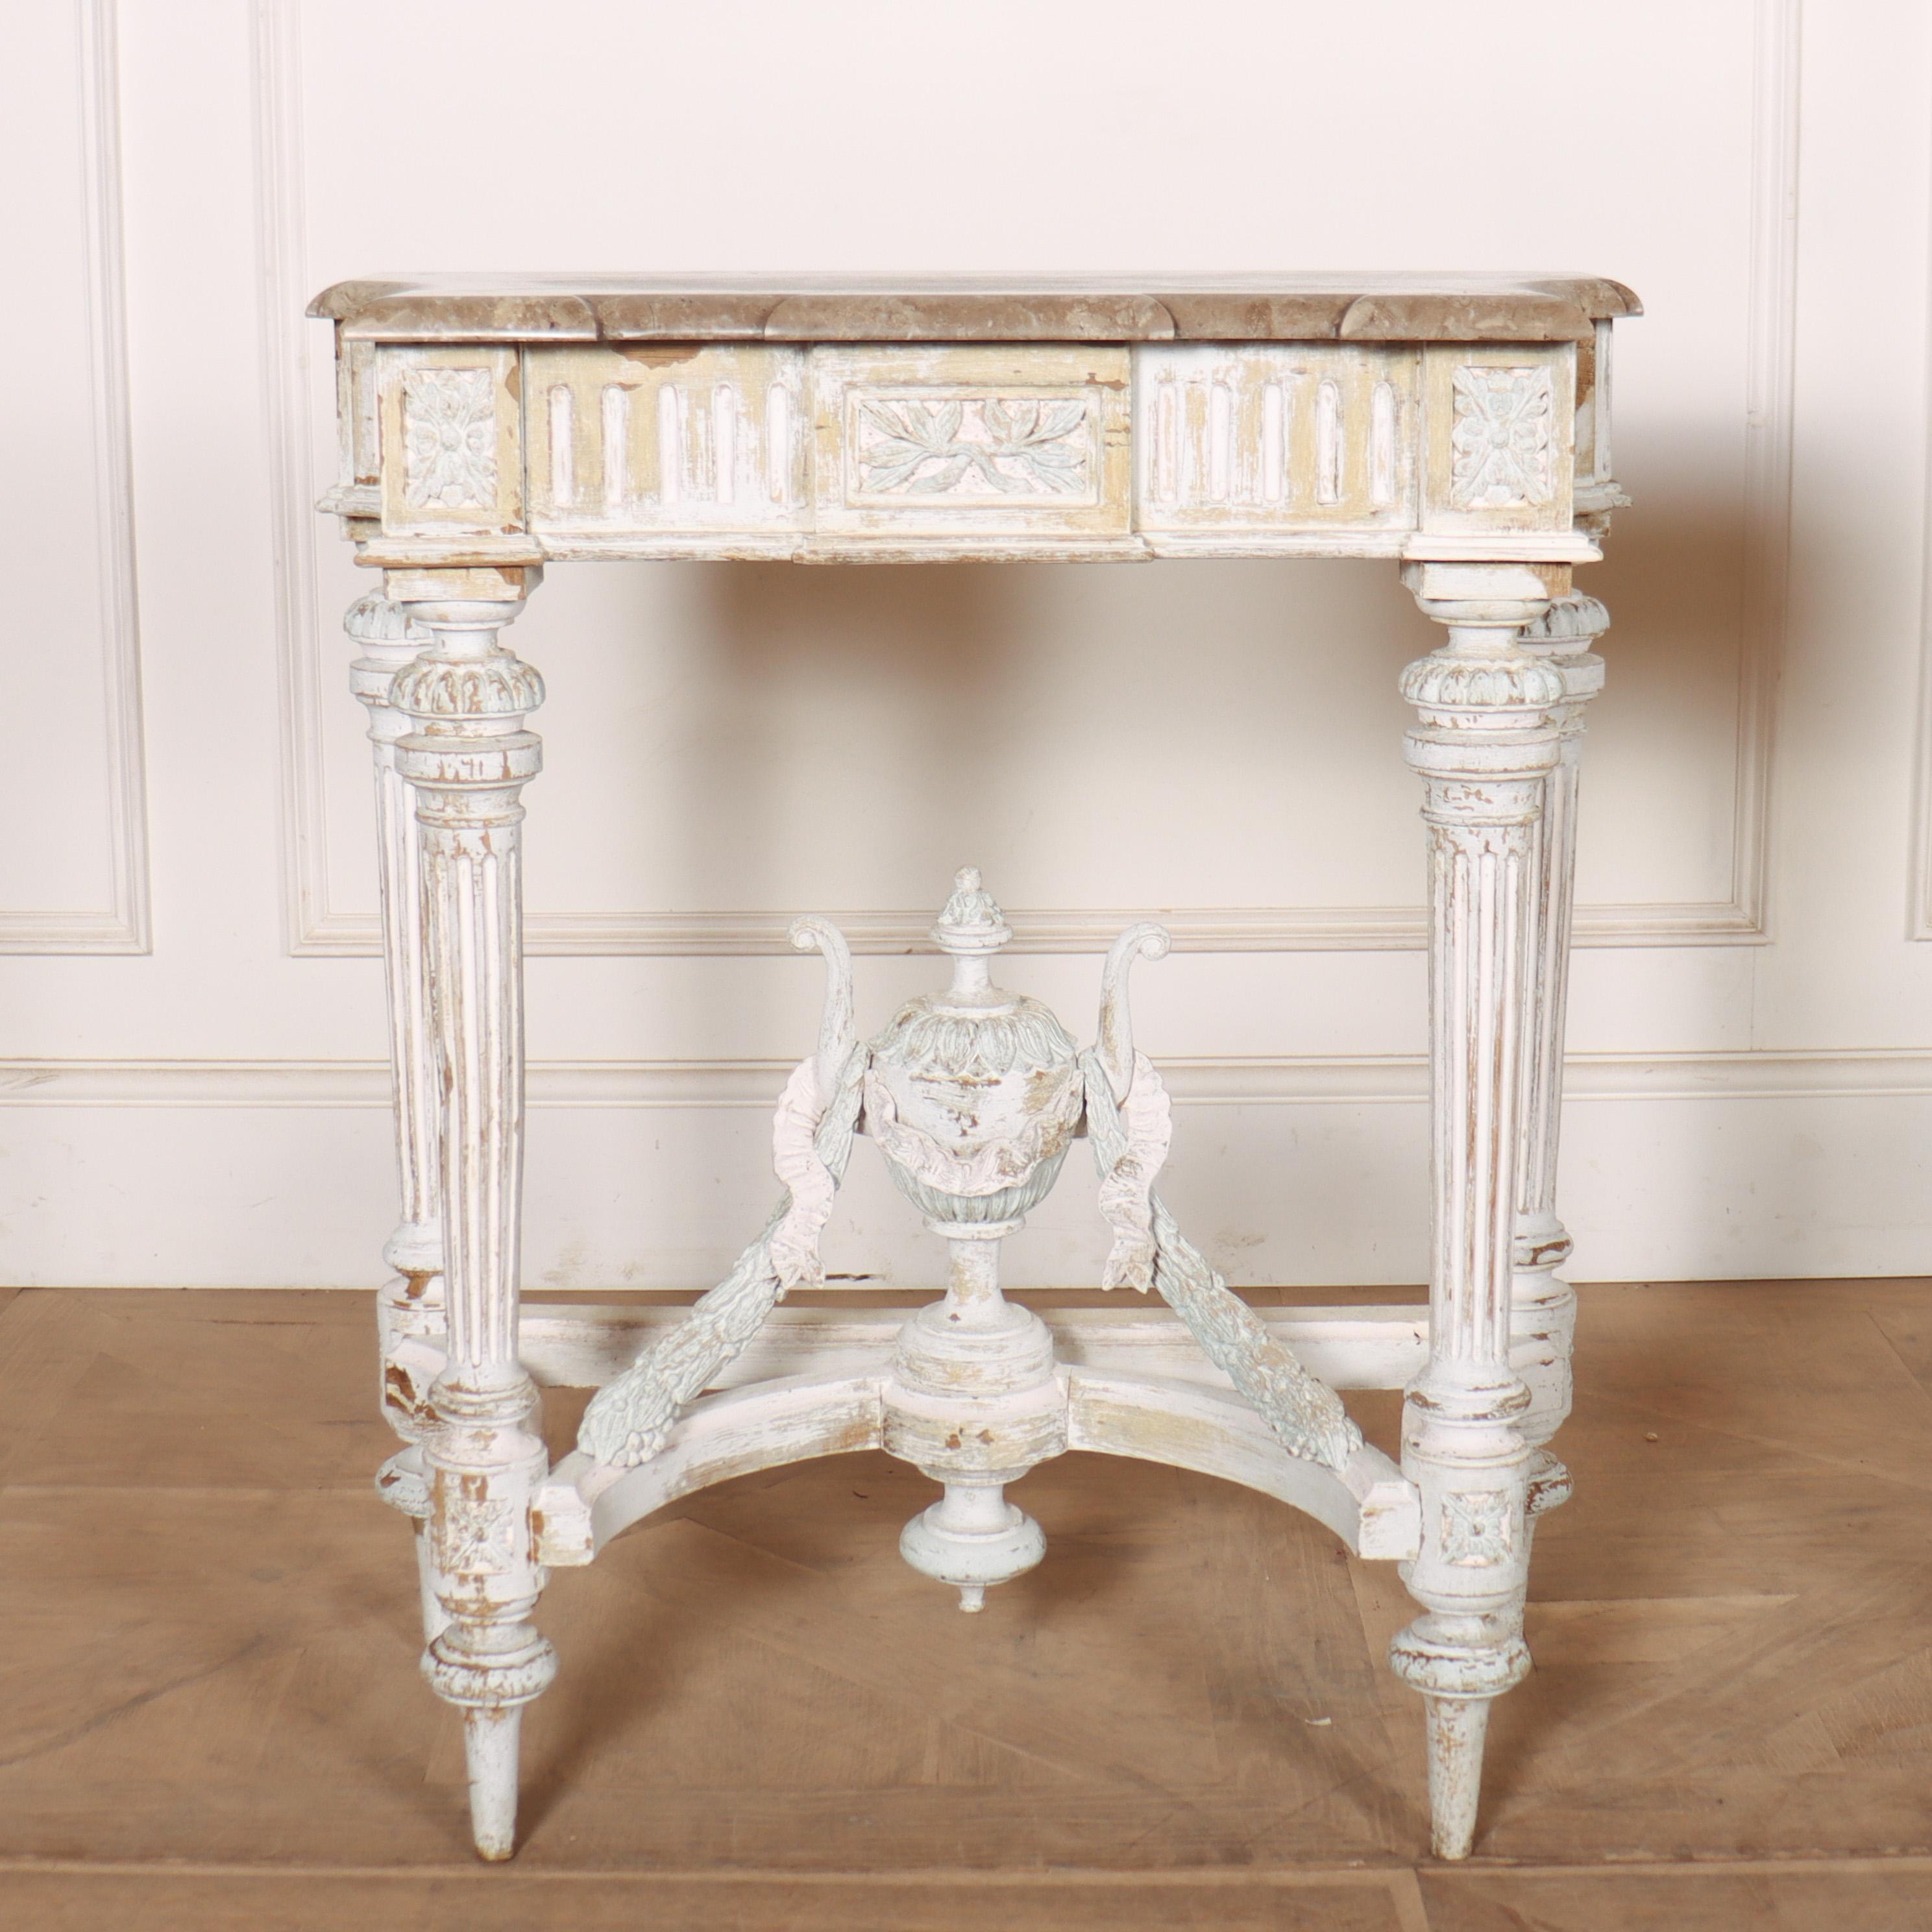 Wonderful pair of small 19th C French console tables with fabulous marble tops. 1880.

Reference: 8239

Dimensions
27.5 inches (70 cms) Wide
14 inches (36 cms) Deep
30.5 inches (77 cms) High